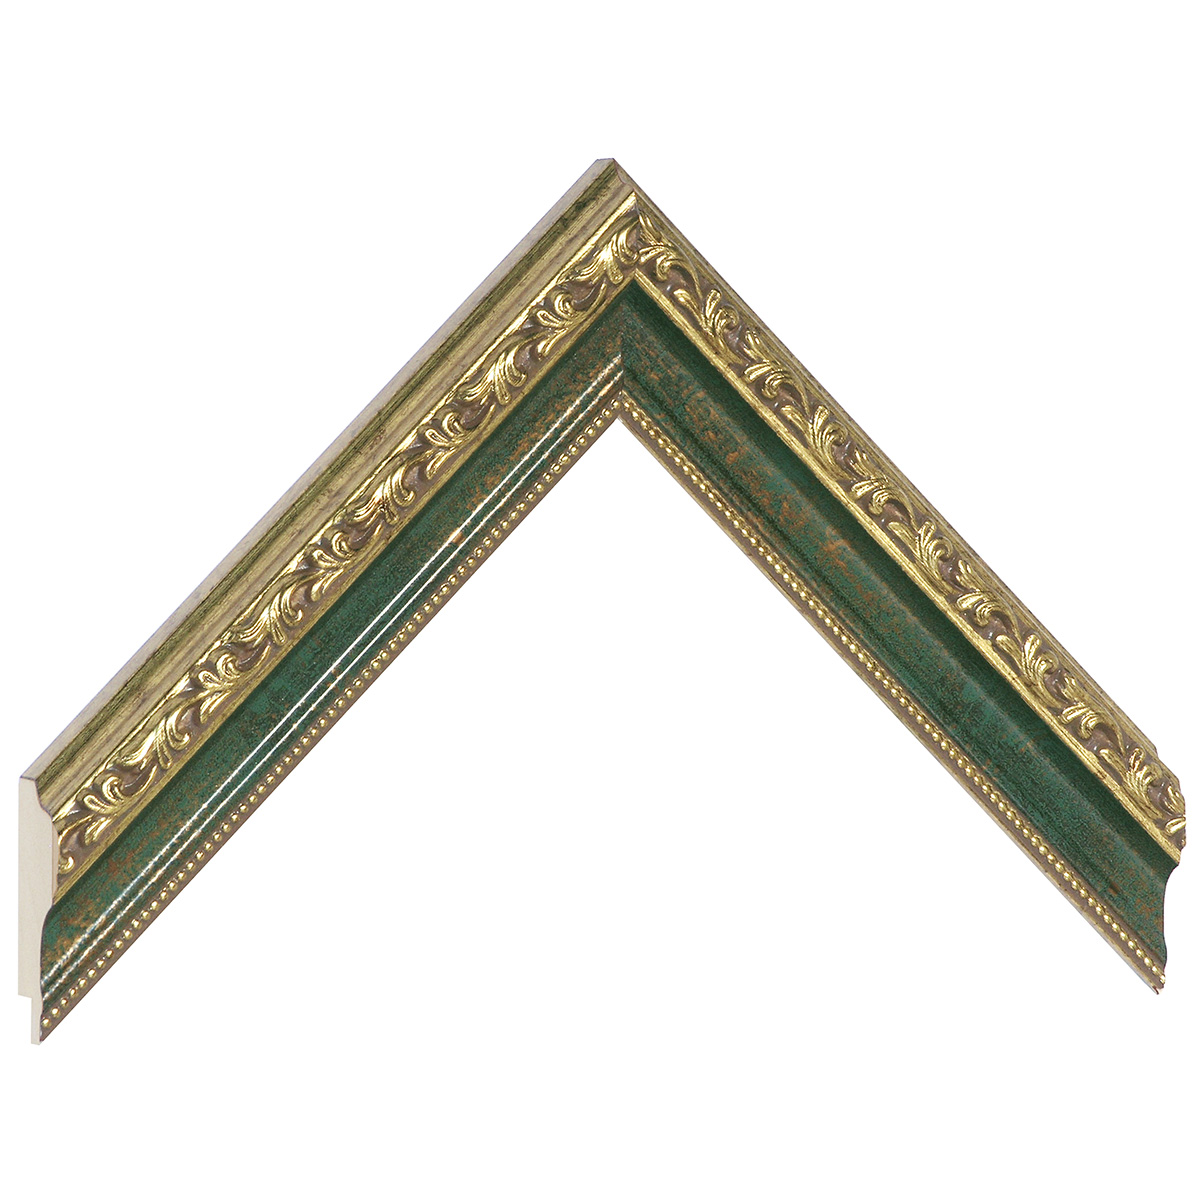 Moulding finger-jointed pine width 32mm - green with gold decorations - Sample